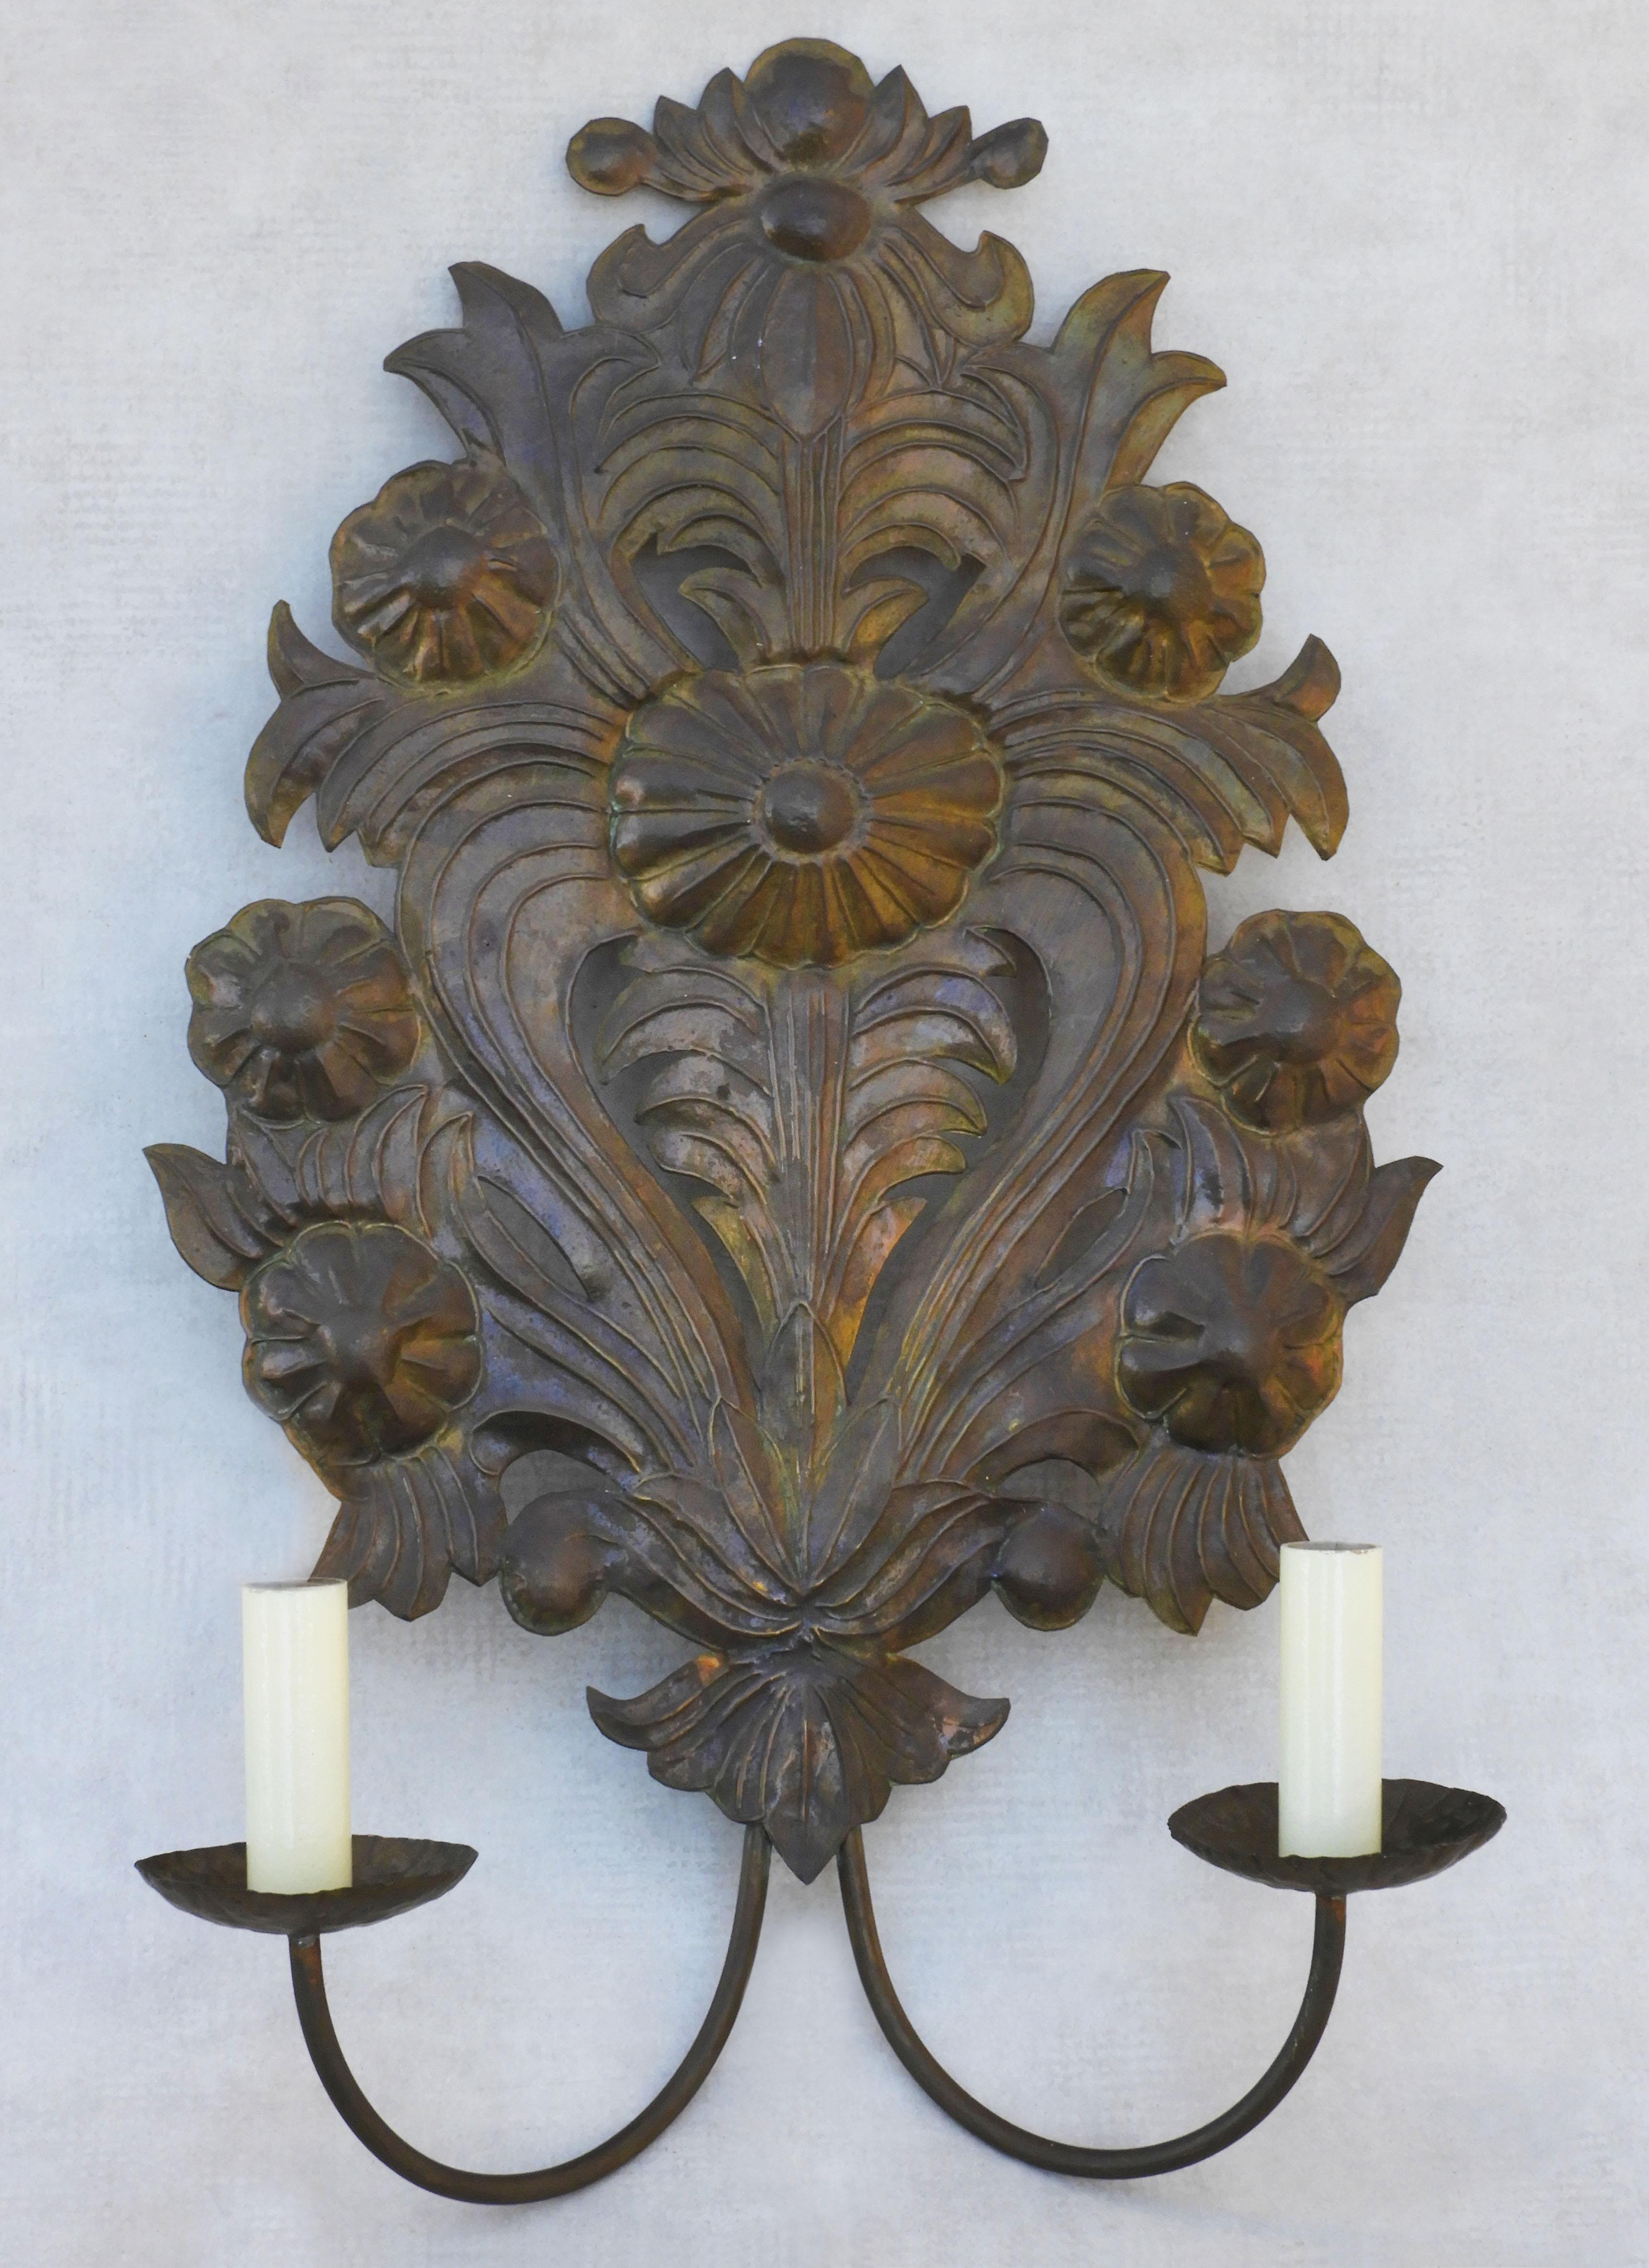 Embossed Pair of Large French Floral Wall Light Sconces Tôle Repoussé C1900 FREE SHIPPING